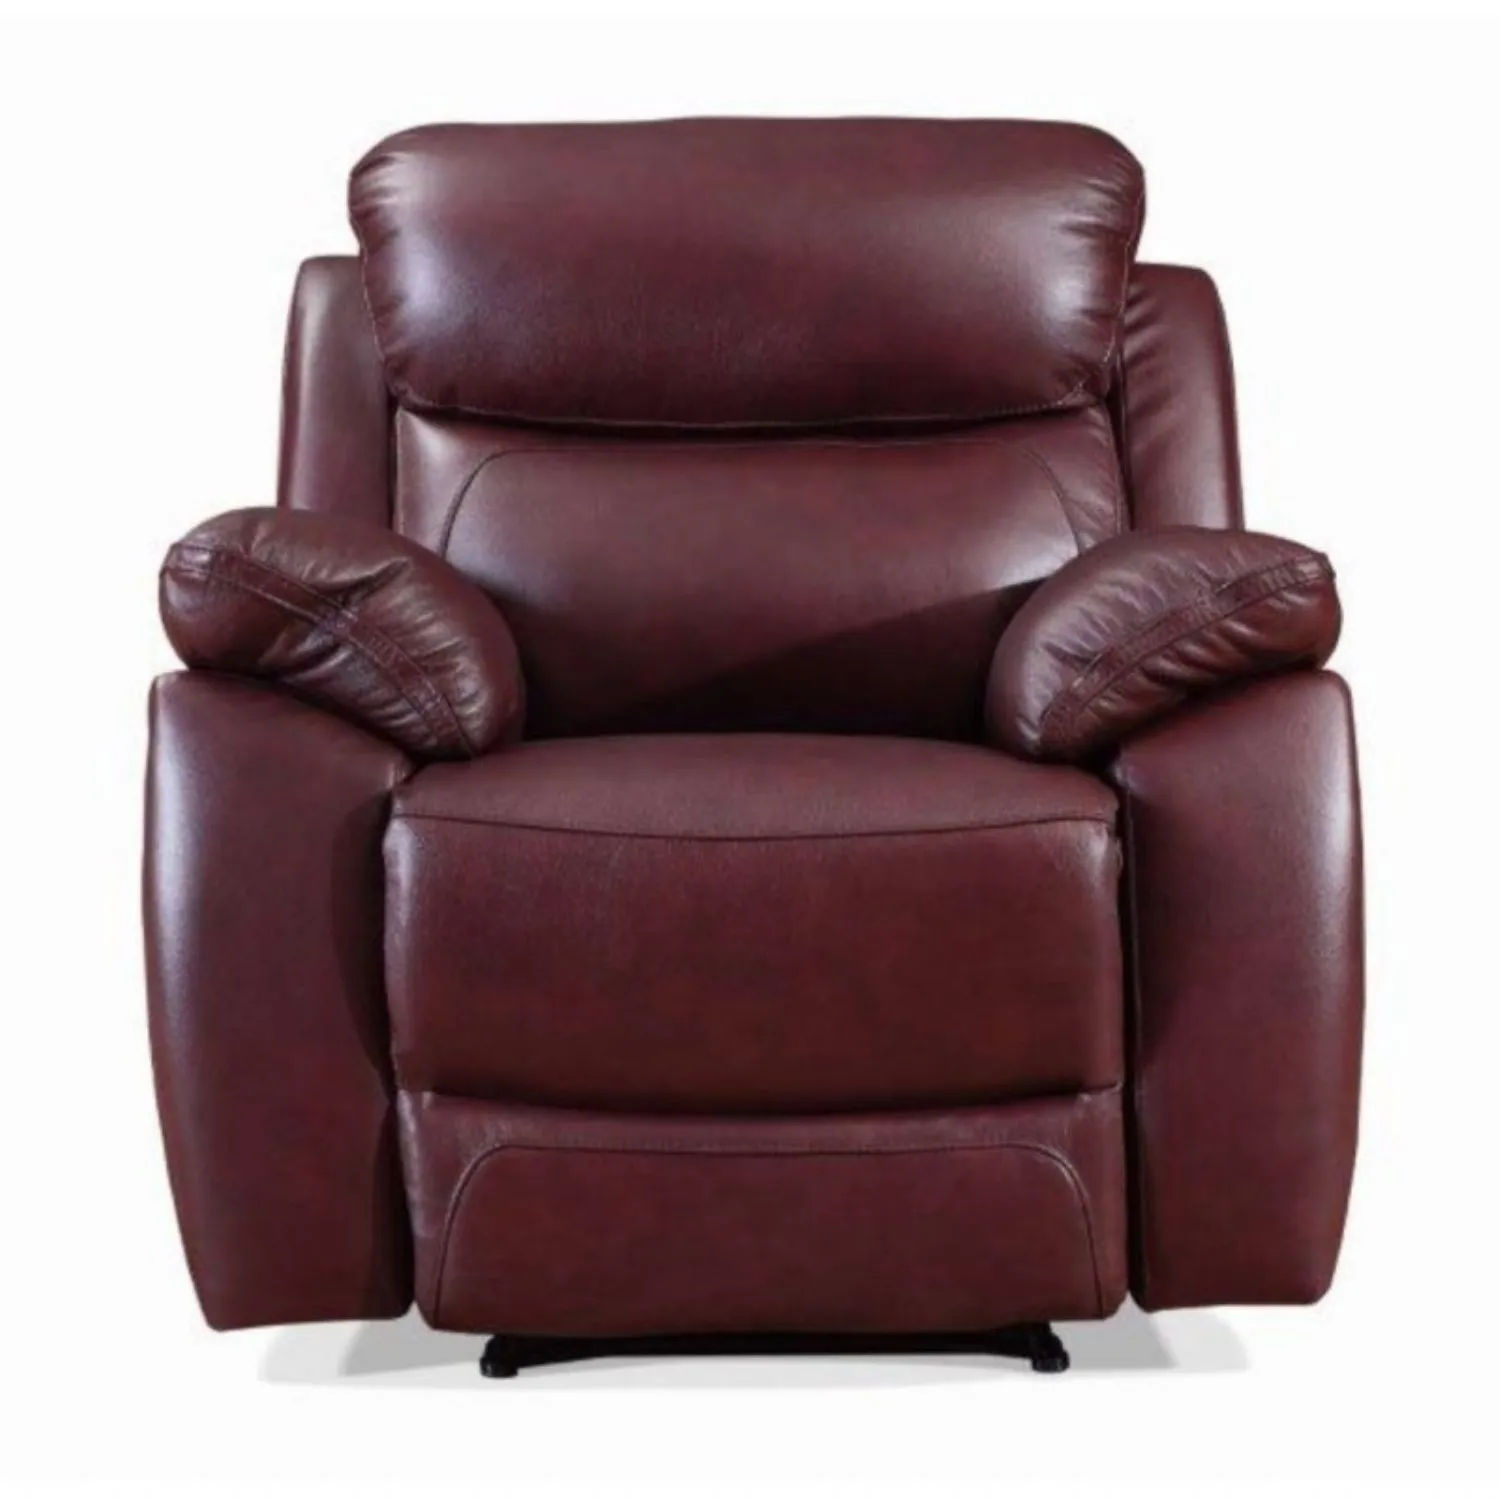 Leather Reclining Armchairs in Burgundy or Tabac Brown